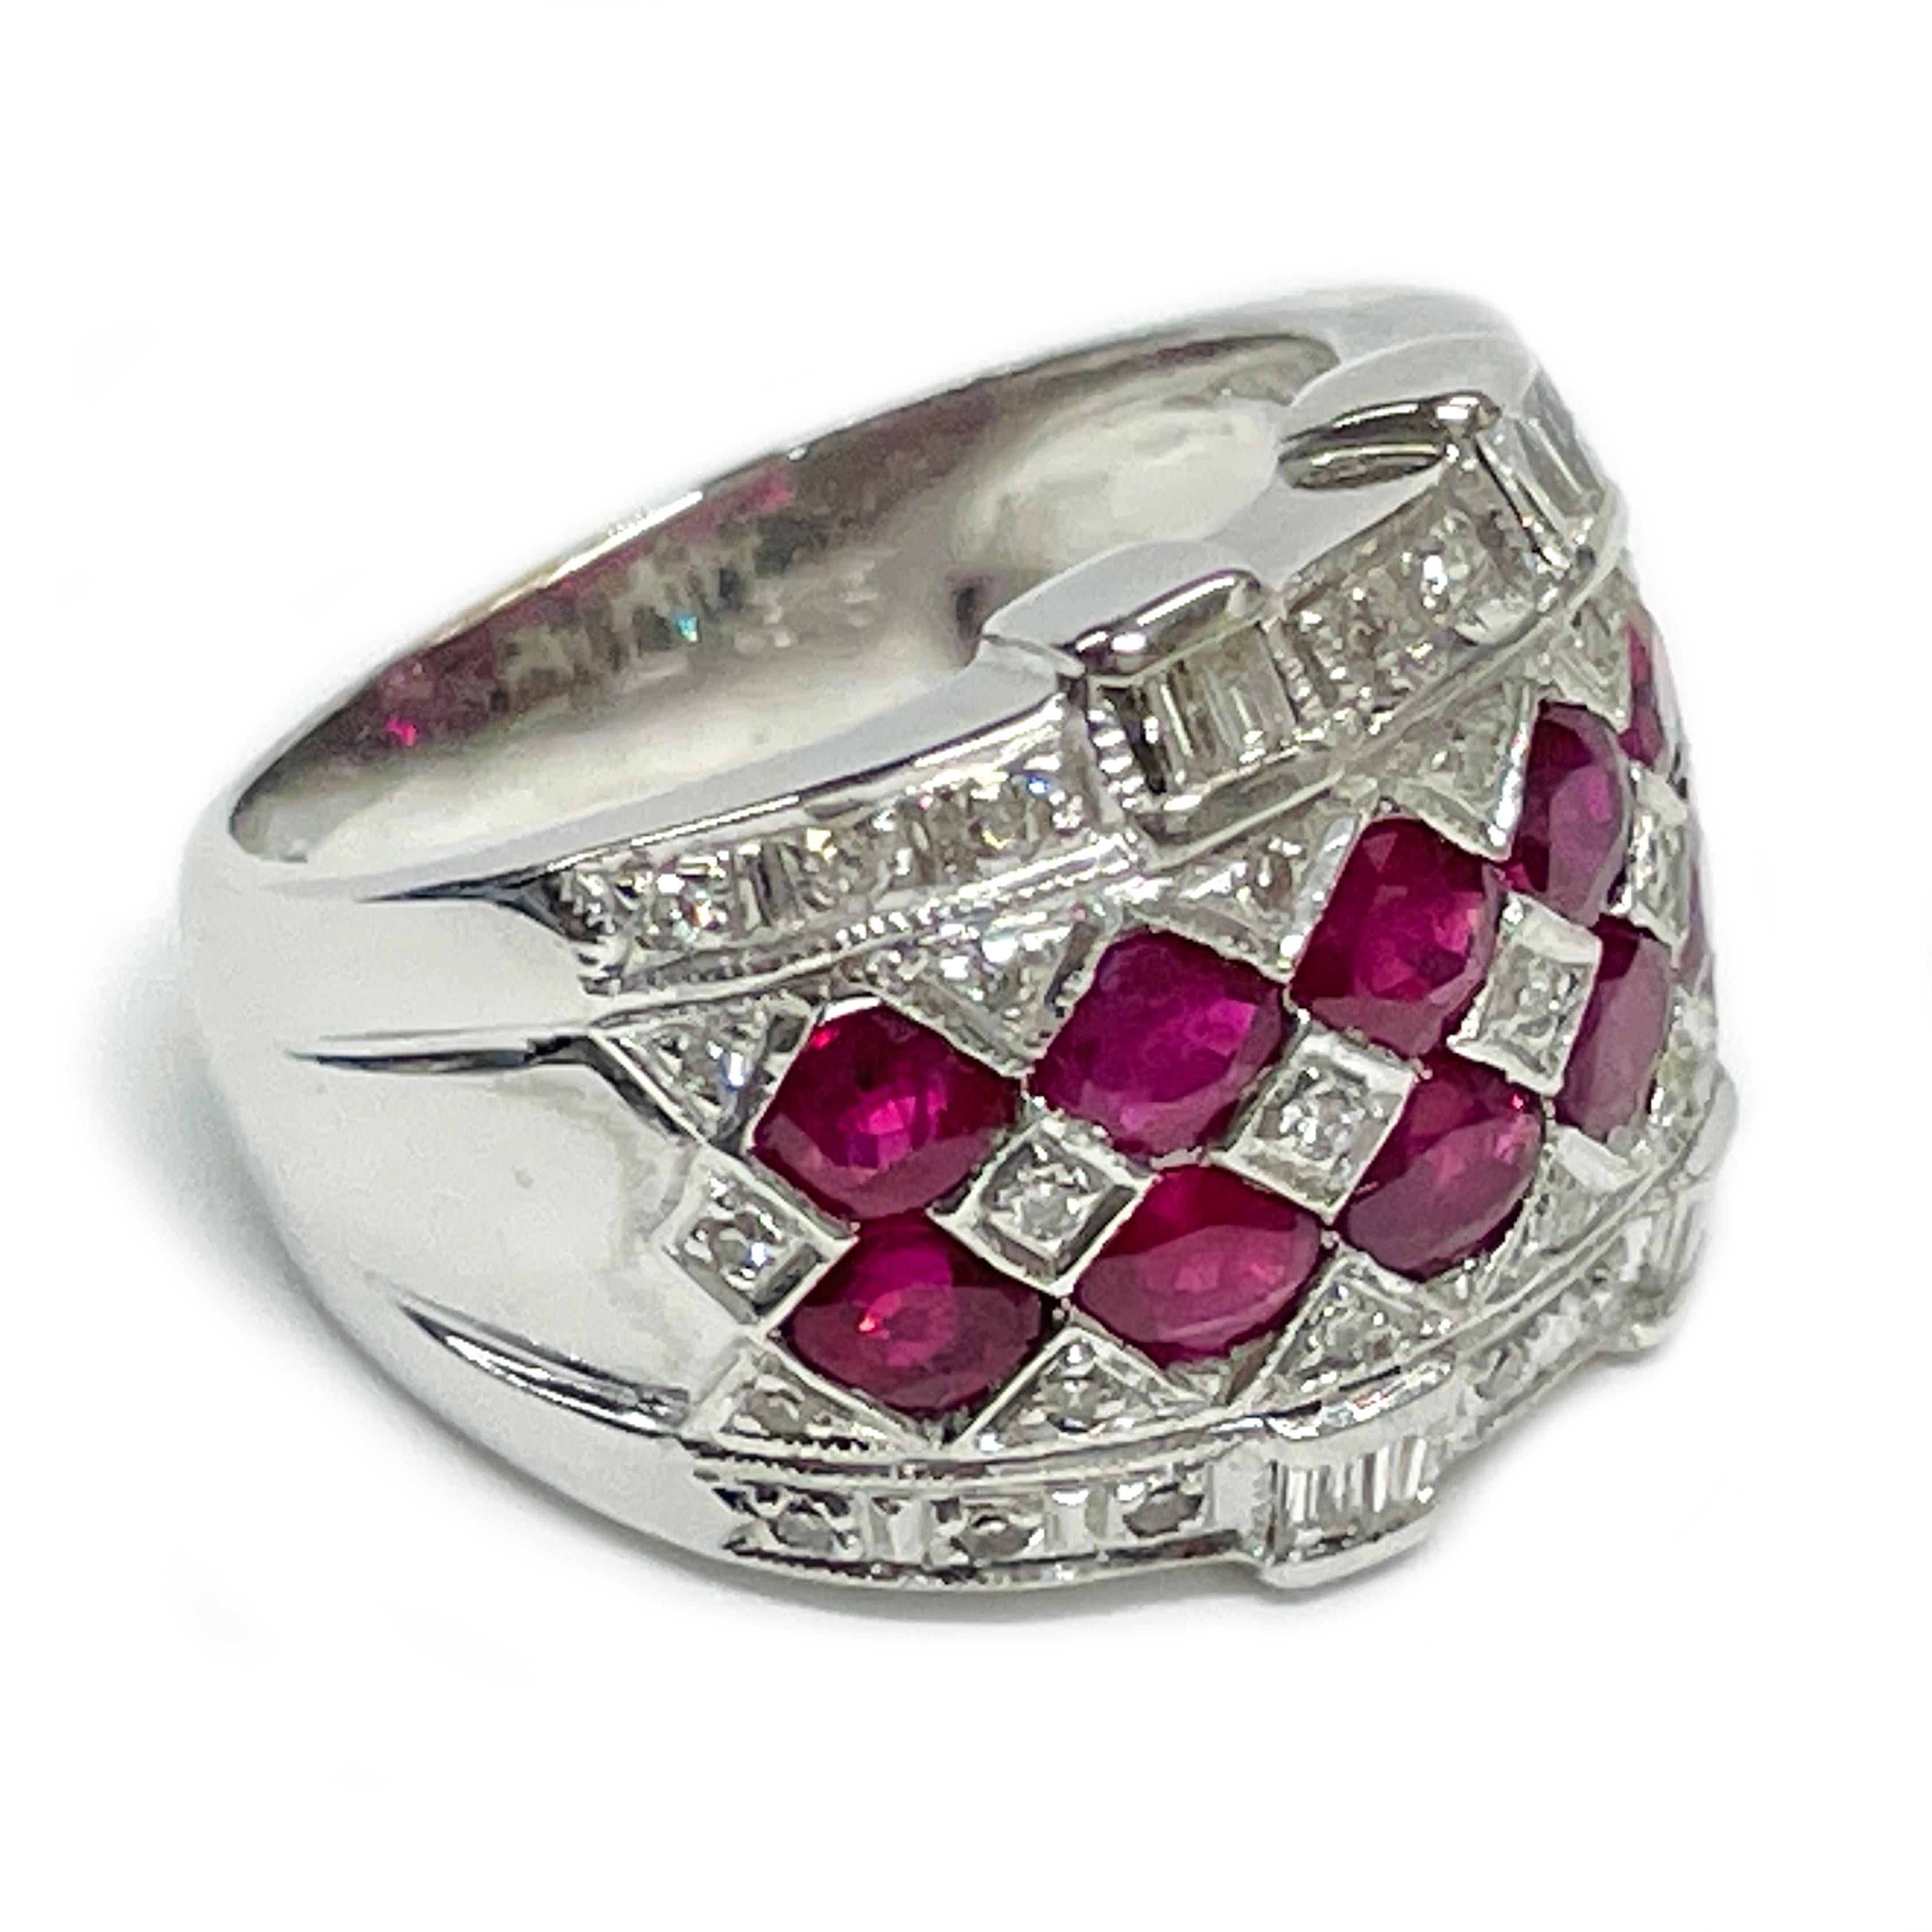 14 Karat White Gold Ruby Diamond Ring. The ring features twelve 3.5 x 3mm oval rubies, eight tapered baguette diamonds, and thirty-seven 3.5mm single cut diamonds. The rubies have a carat total weight of 0.41ctw. The diamonds have a carat total